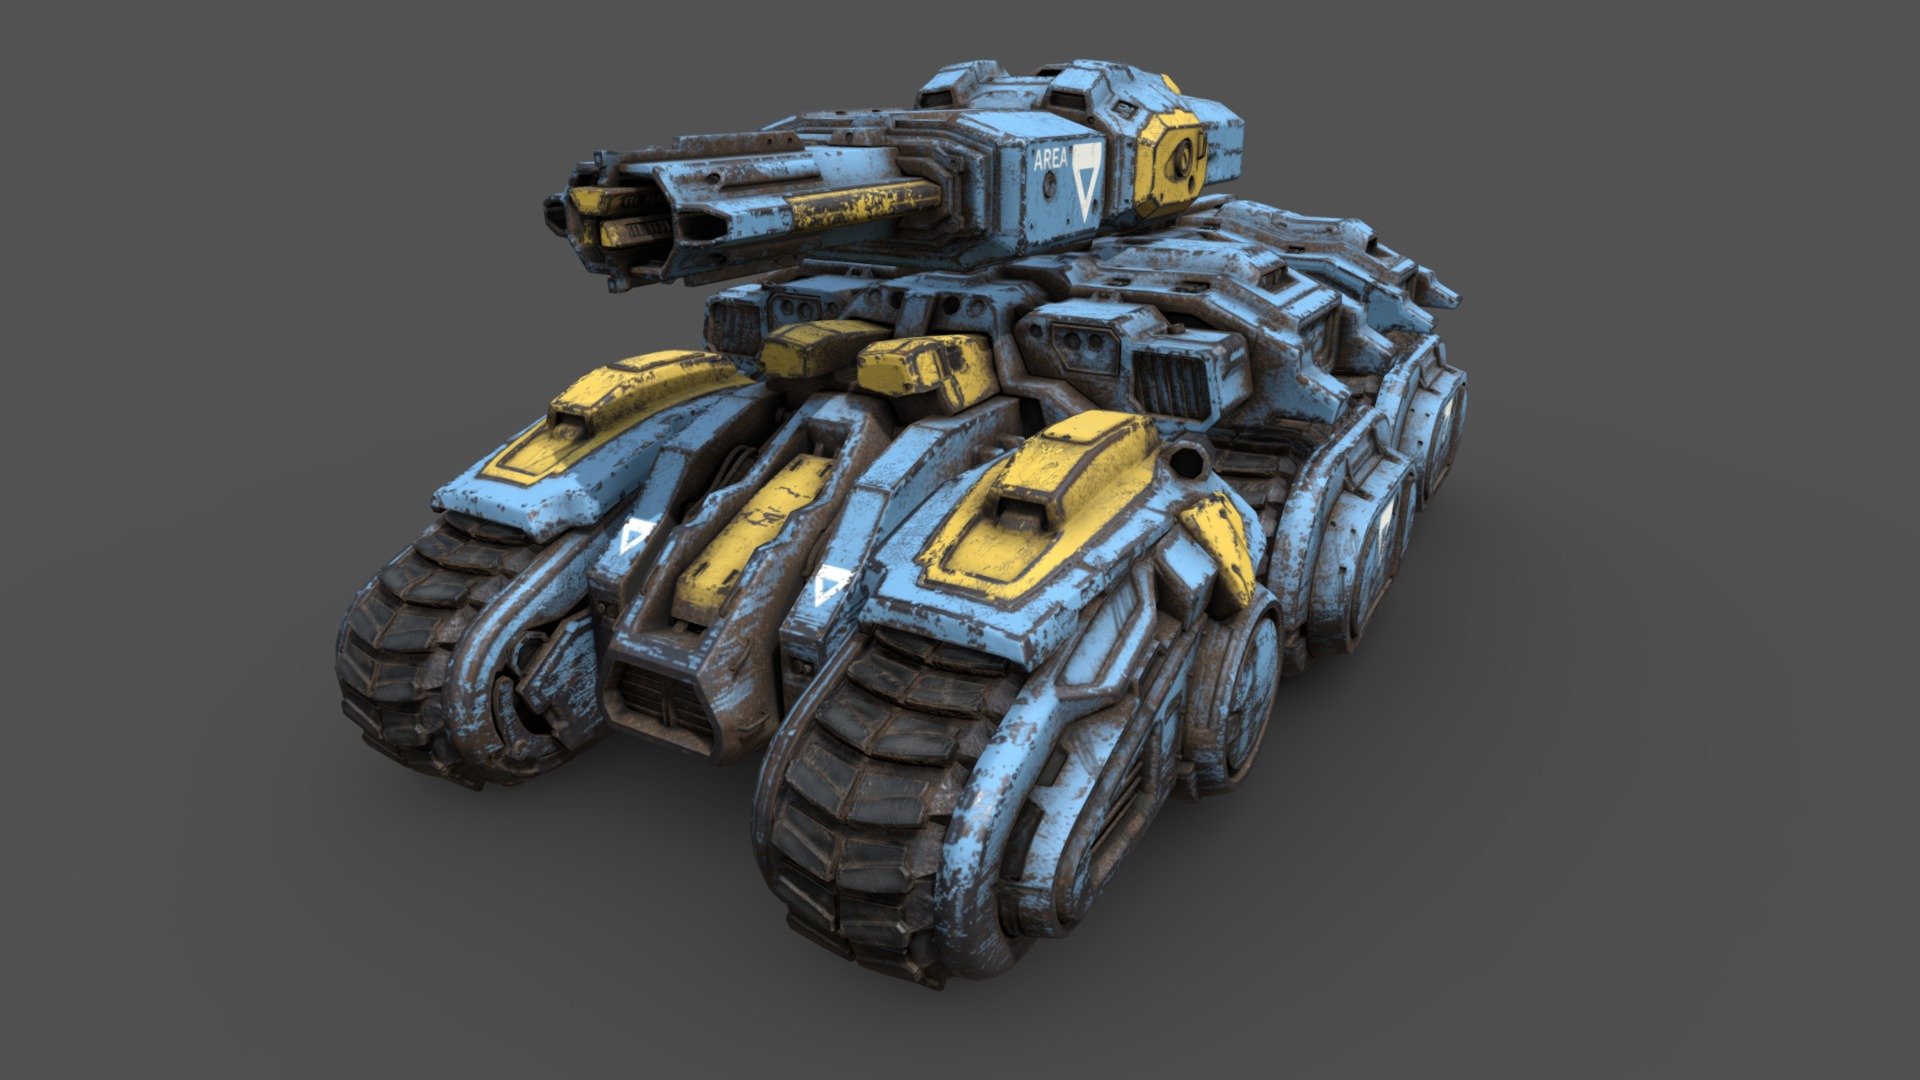 A tribute to the epic siege tank design from StarCraft. Asset modeled in 3ds Max and surfaced in Substance Painter. Vehicle design inspired by concept image found in the &ldquo;StarCraft II: Field Manual